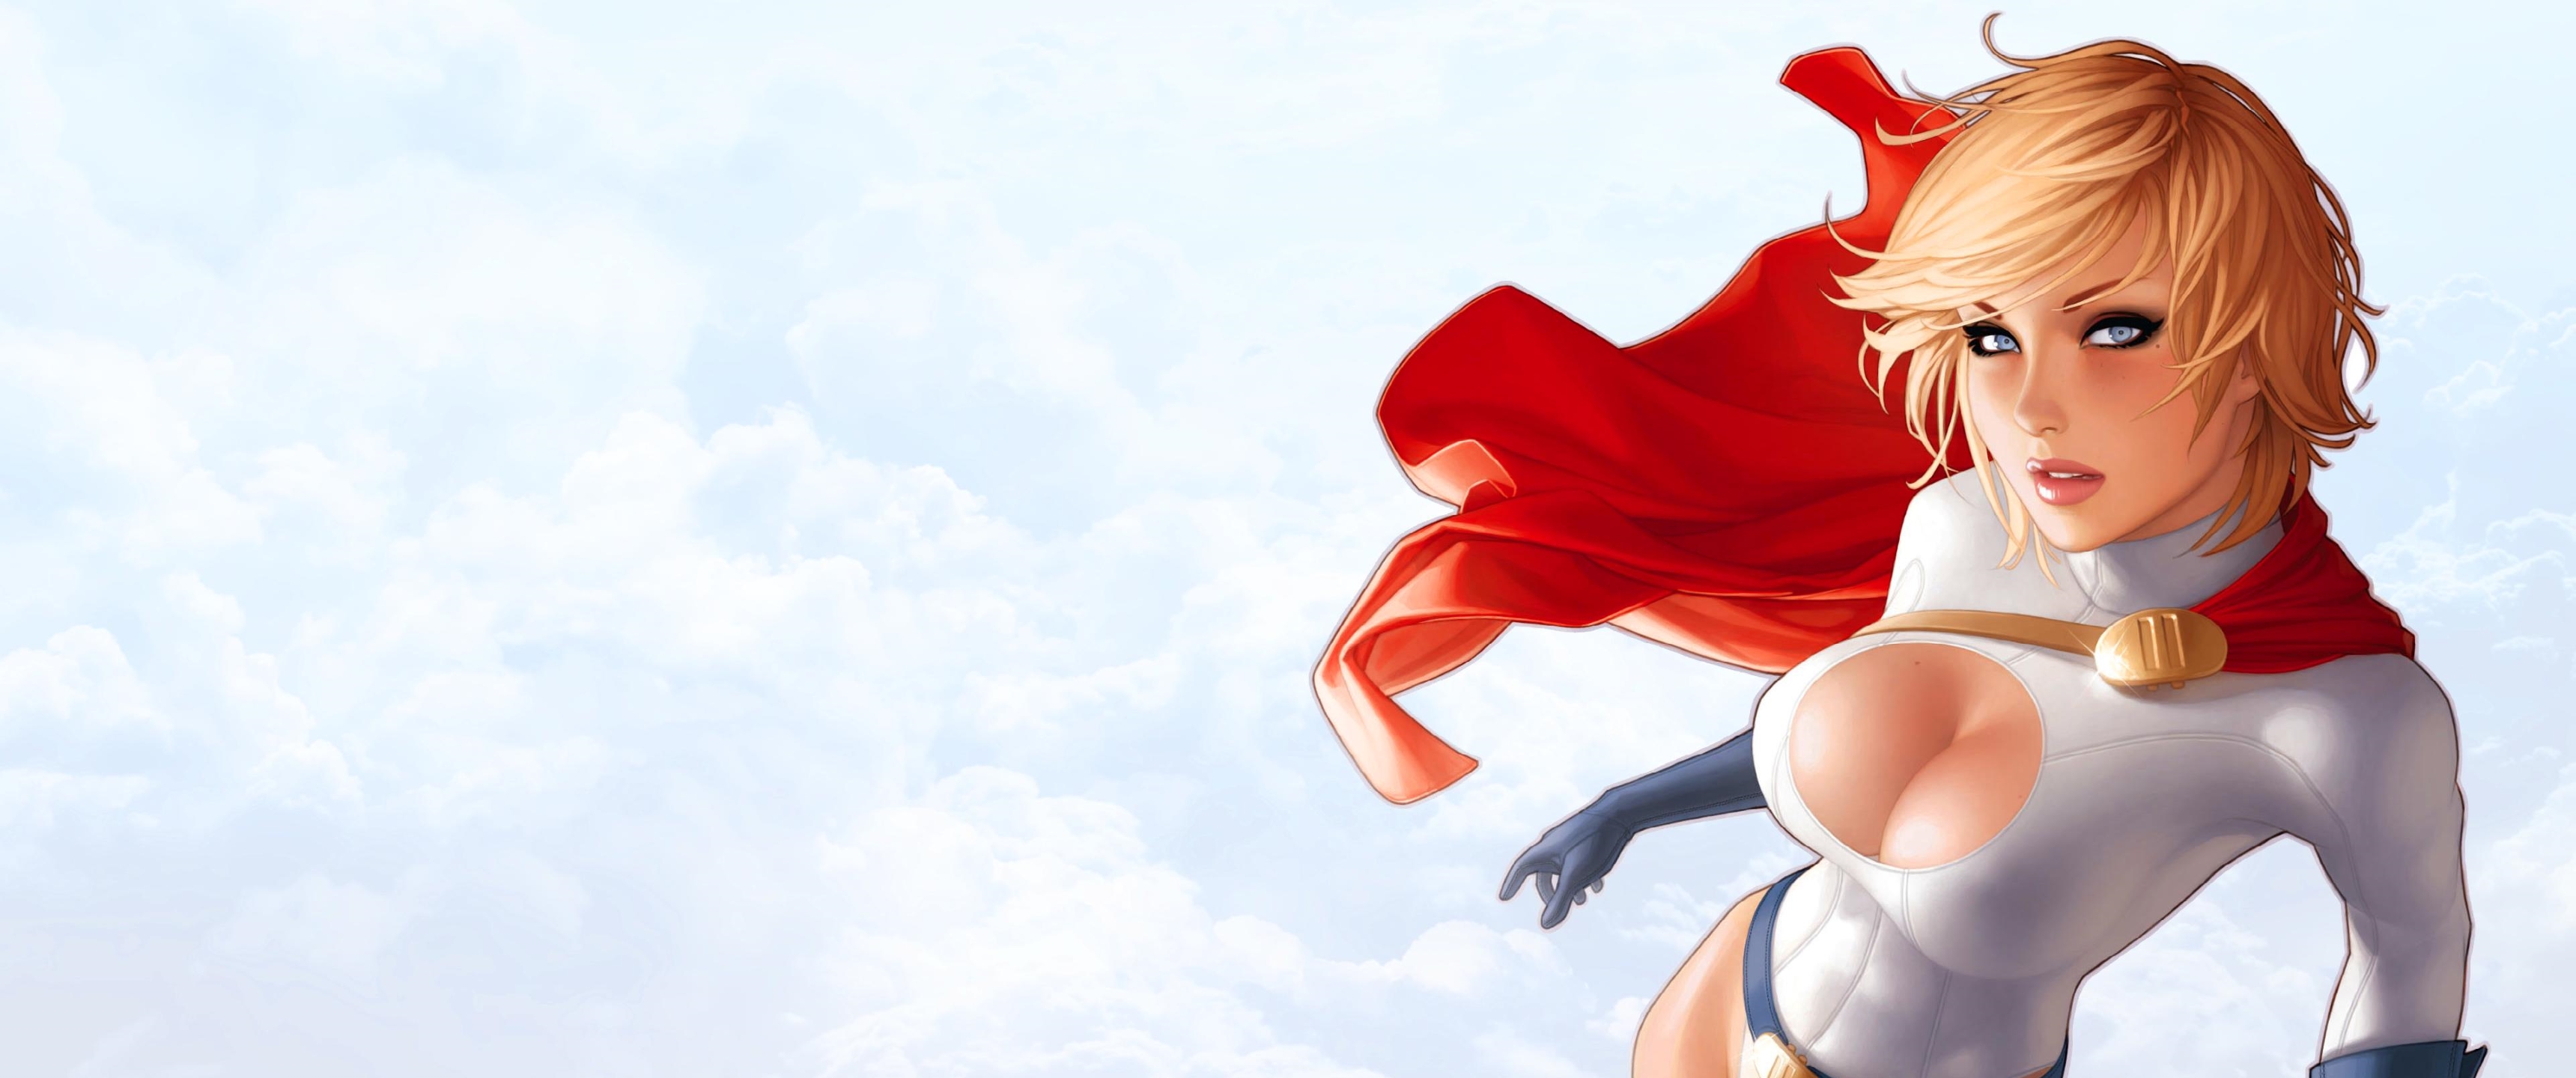 50+ Power Girl HD Wallpapers and Backgrounds